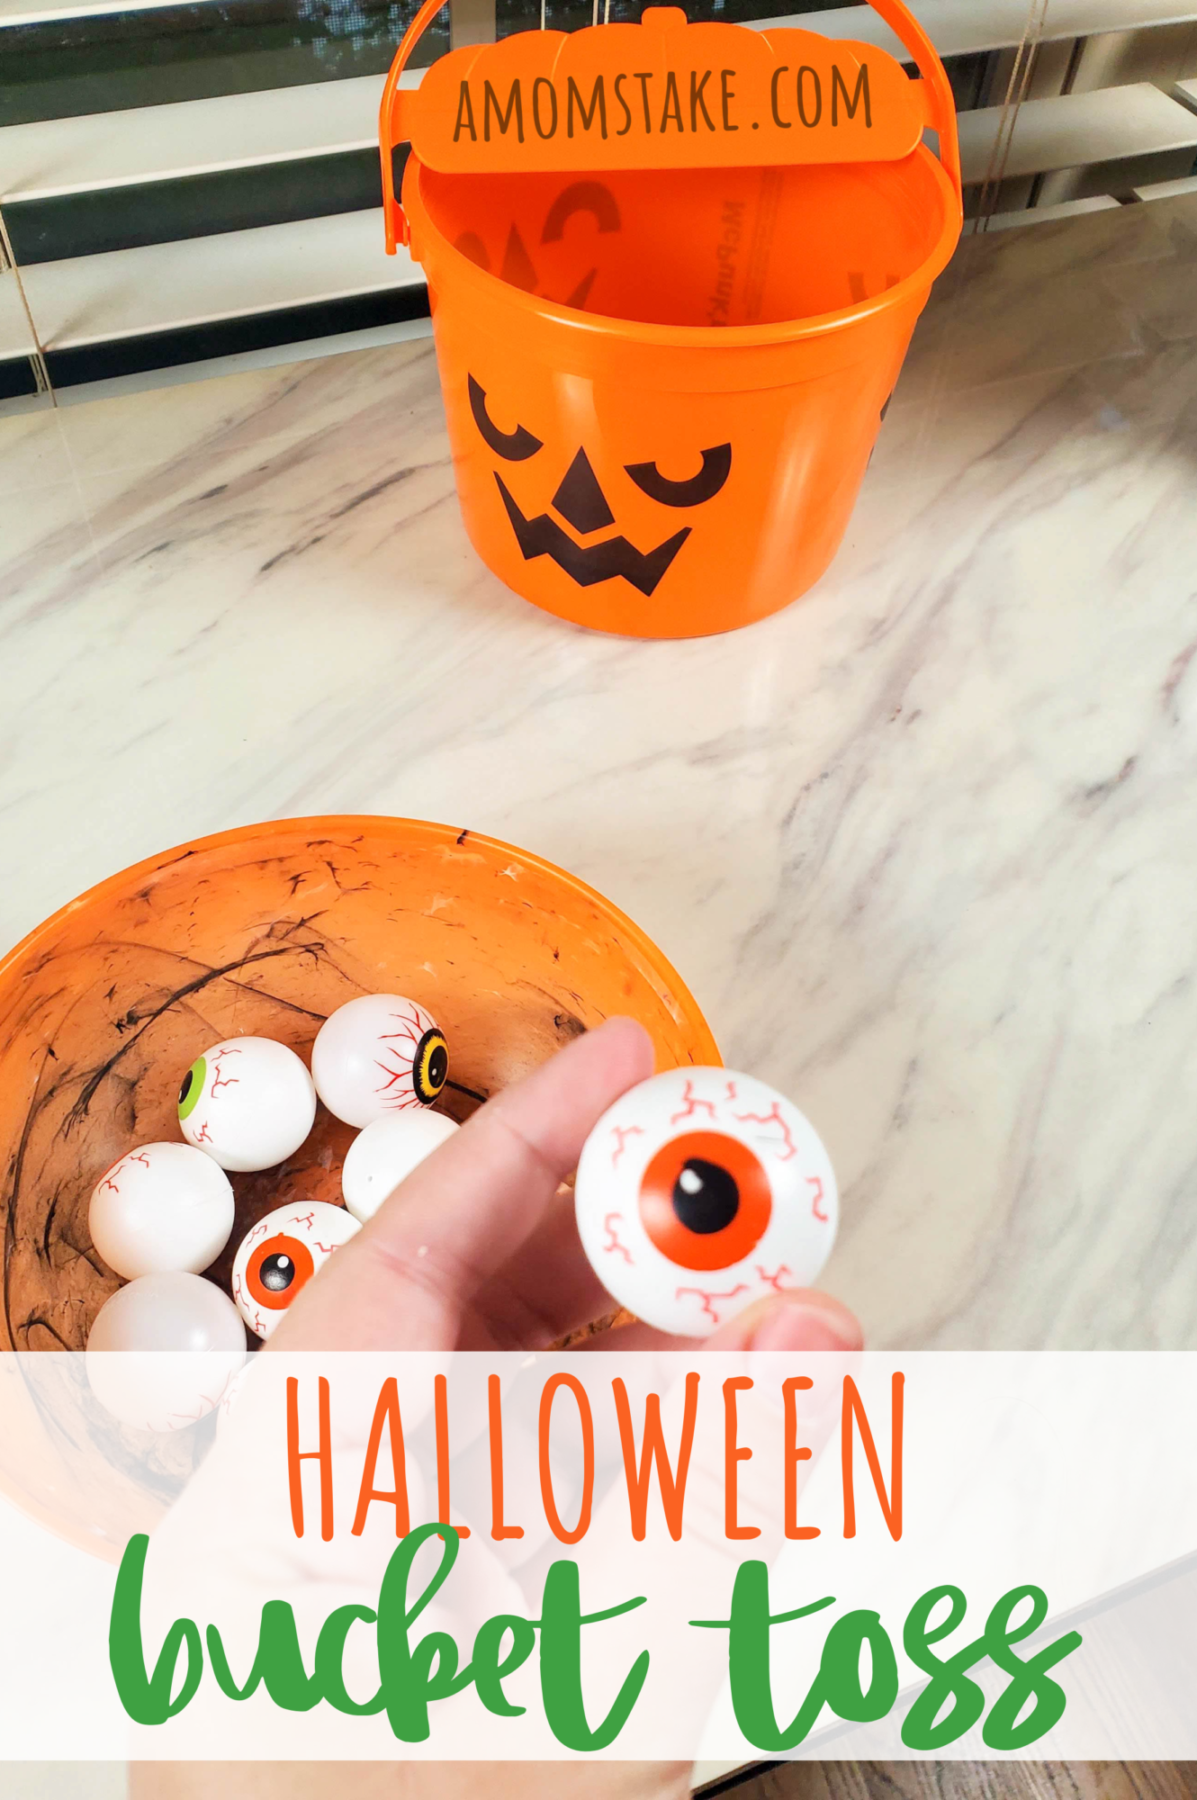 21 Halloween Party Game Ideas and party checklist printable. Get inspired by all these fun kid-friendly Halloween Activities and games for a variety of ages. Fun themed Halloween games for the whole family.